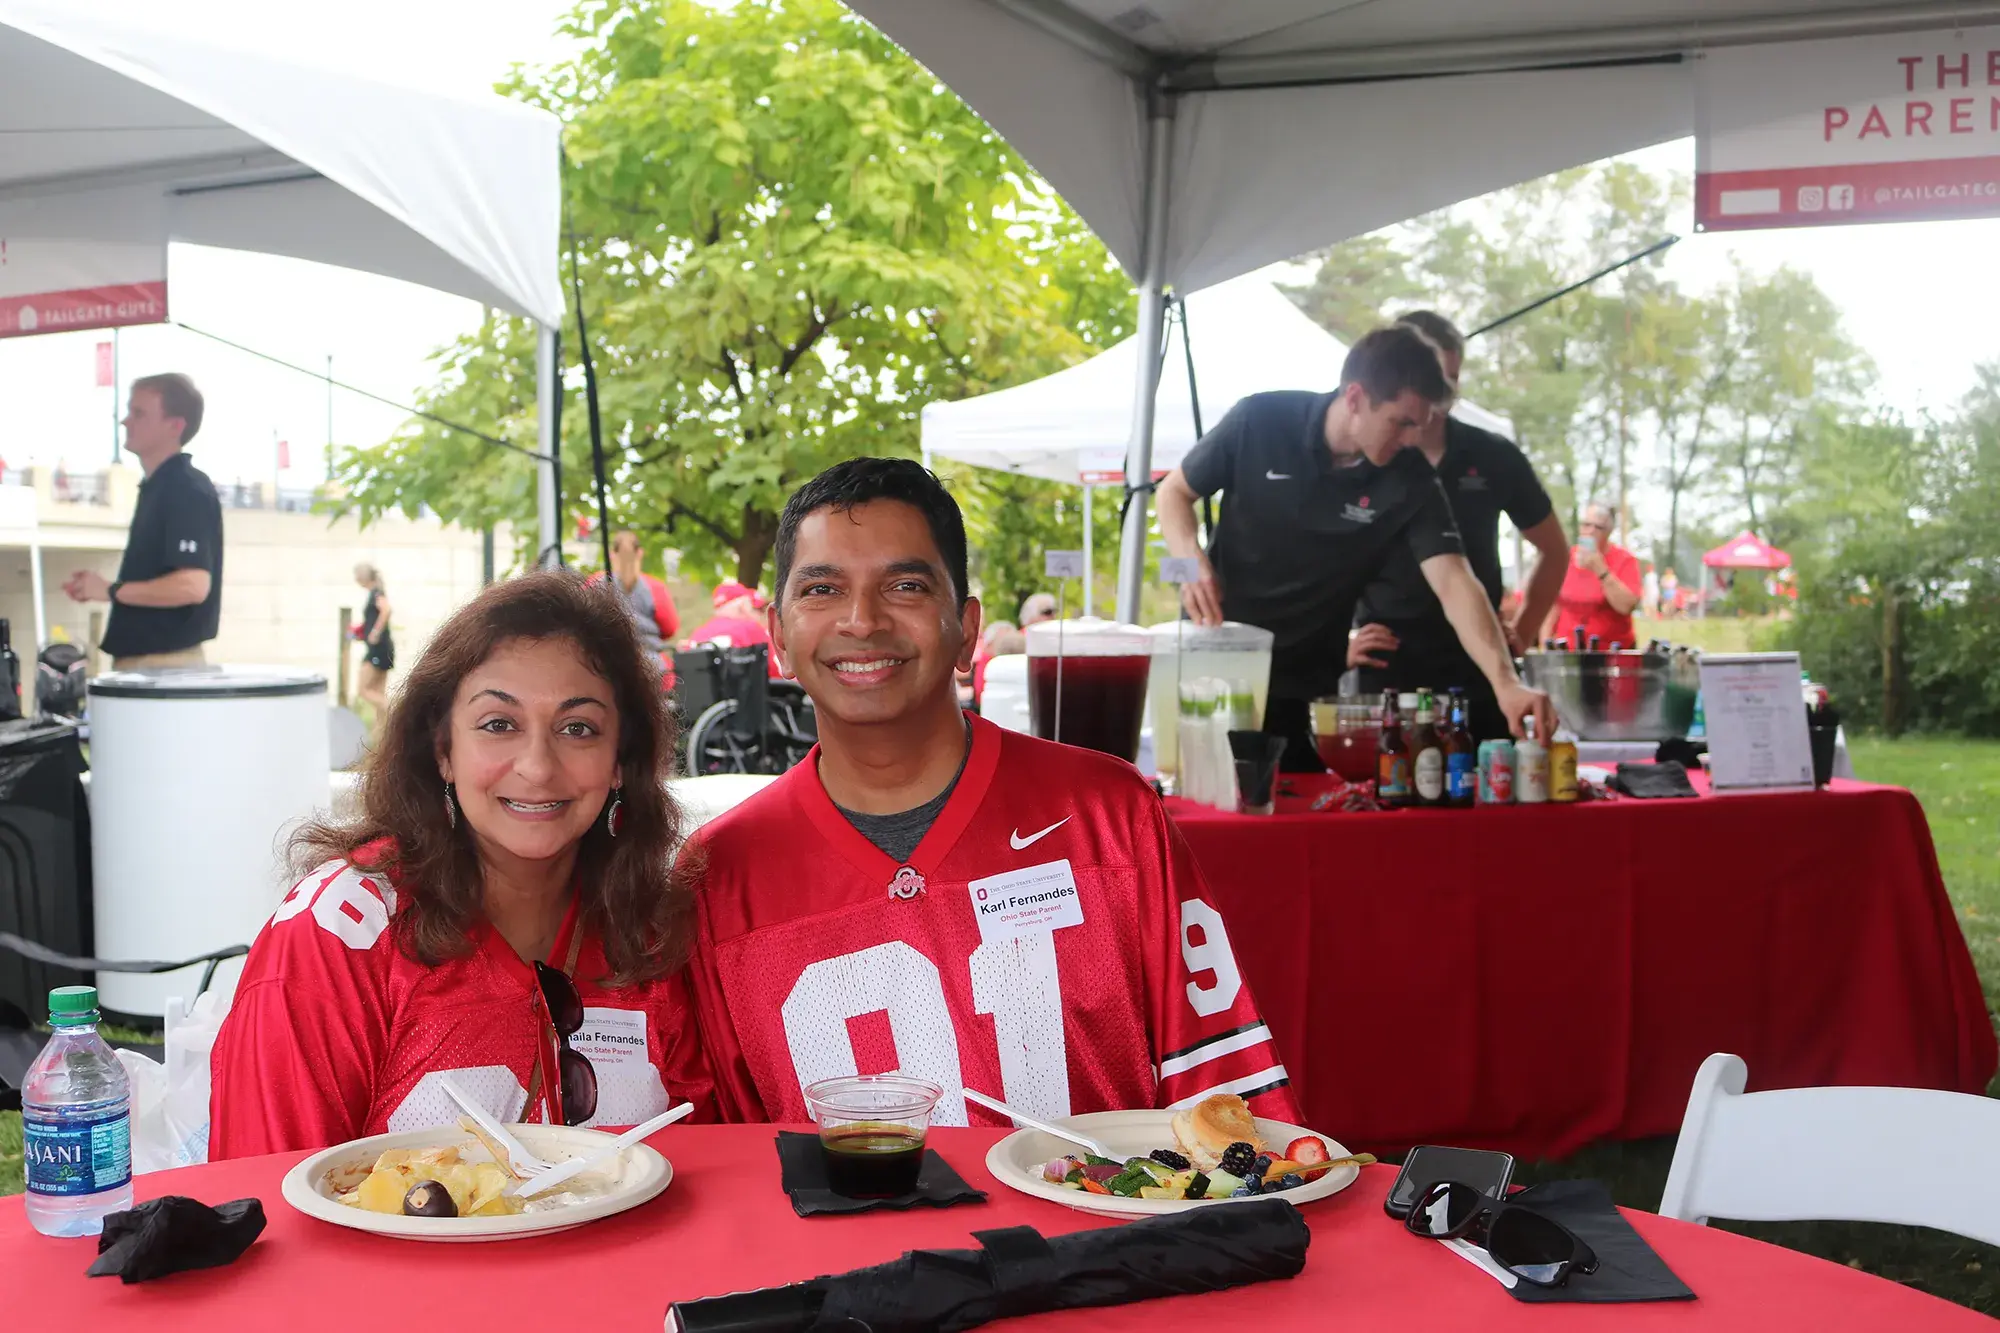 Man and woman wearing ohio state jerseys enjoy a meal under a tent at a Football Tailgate